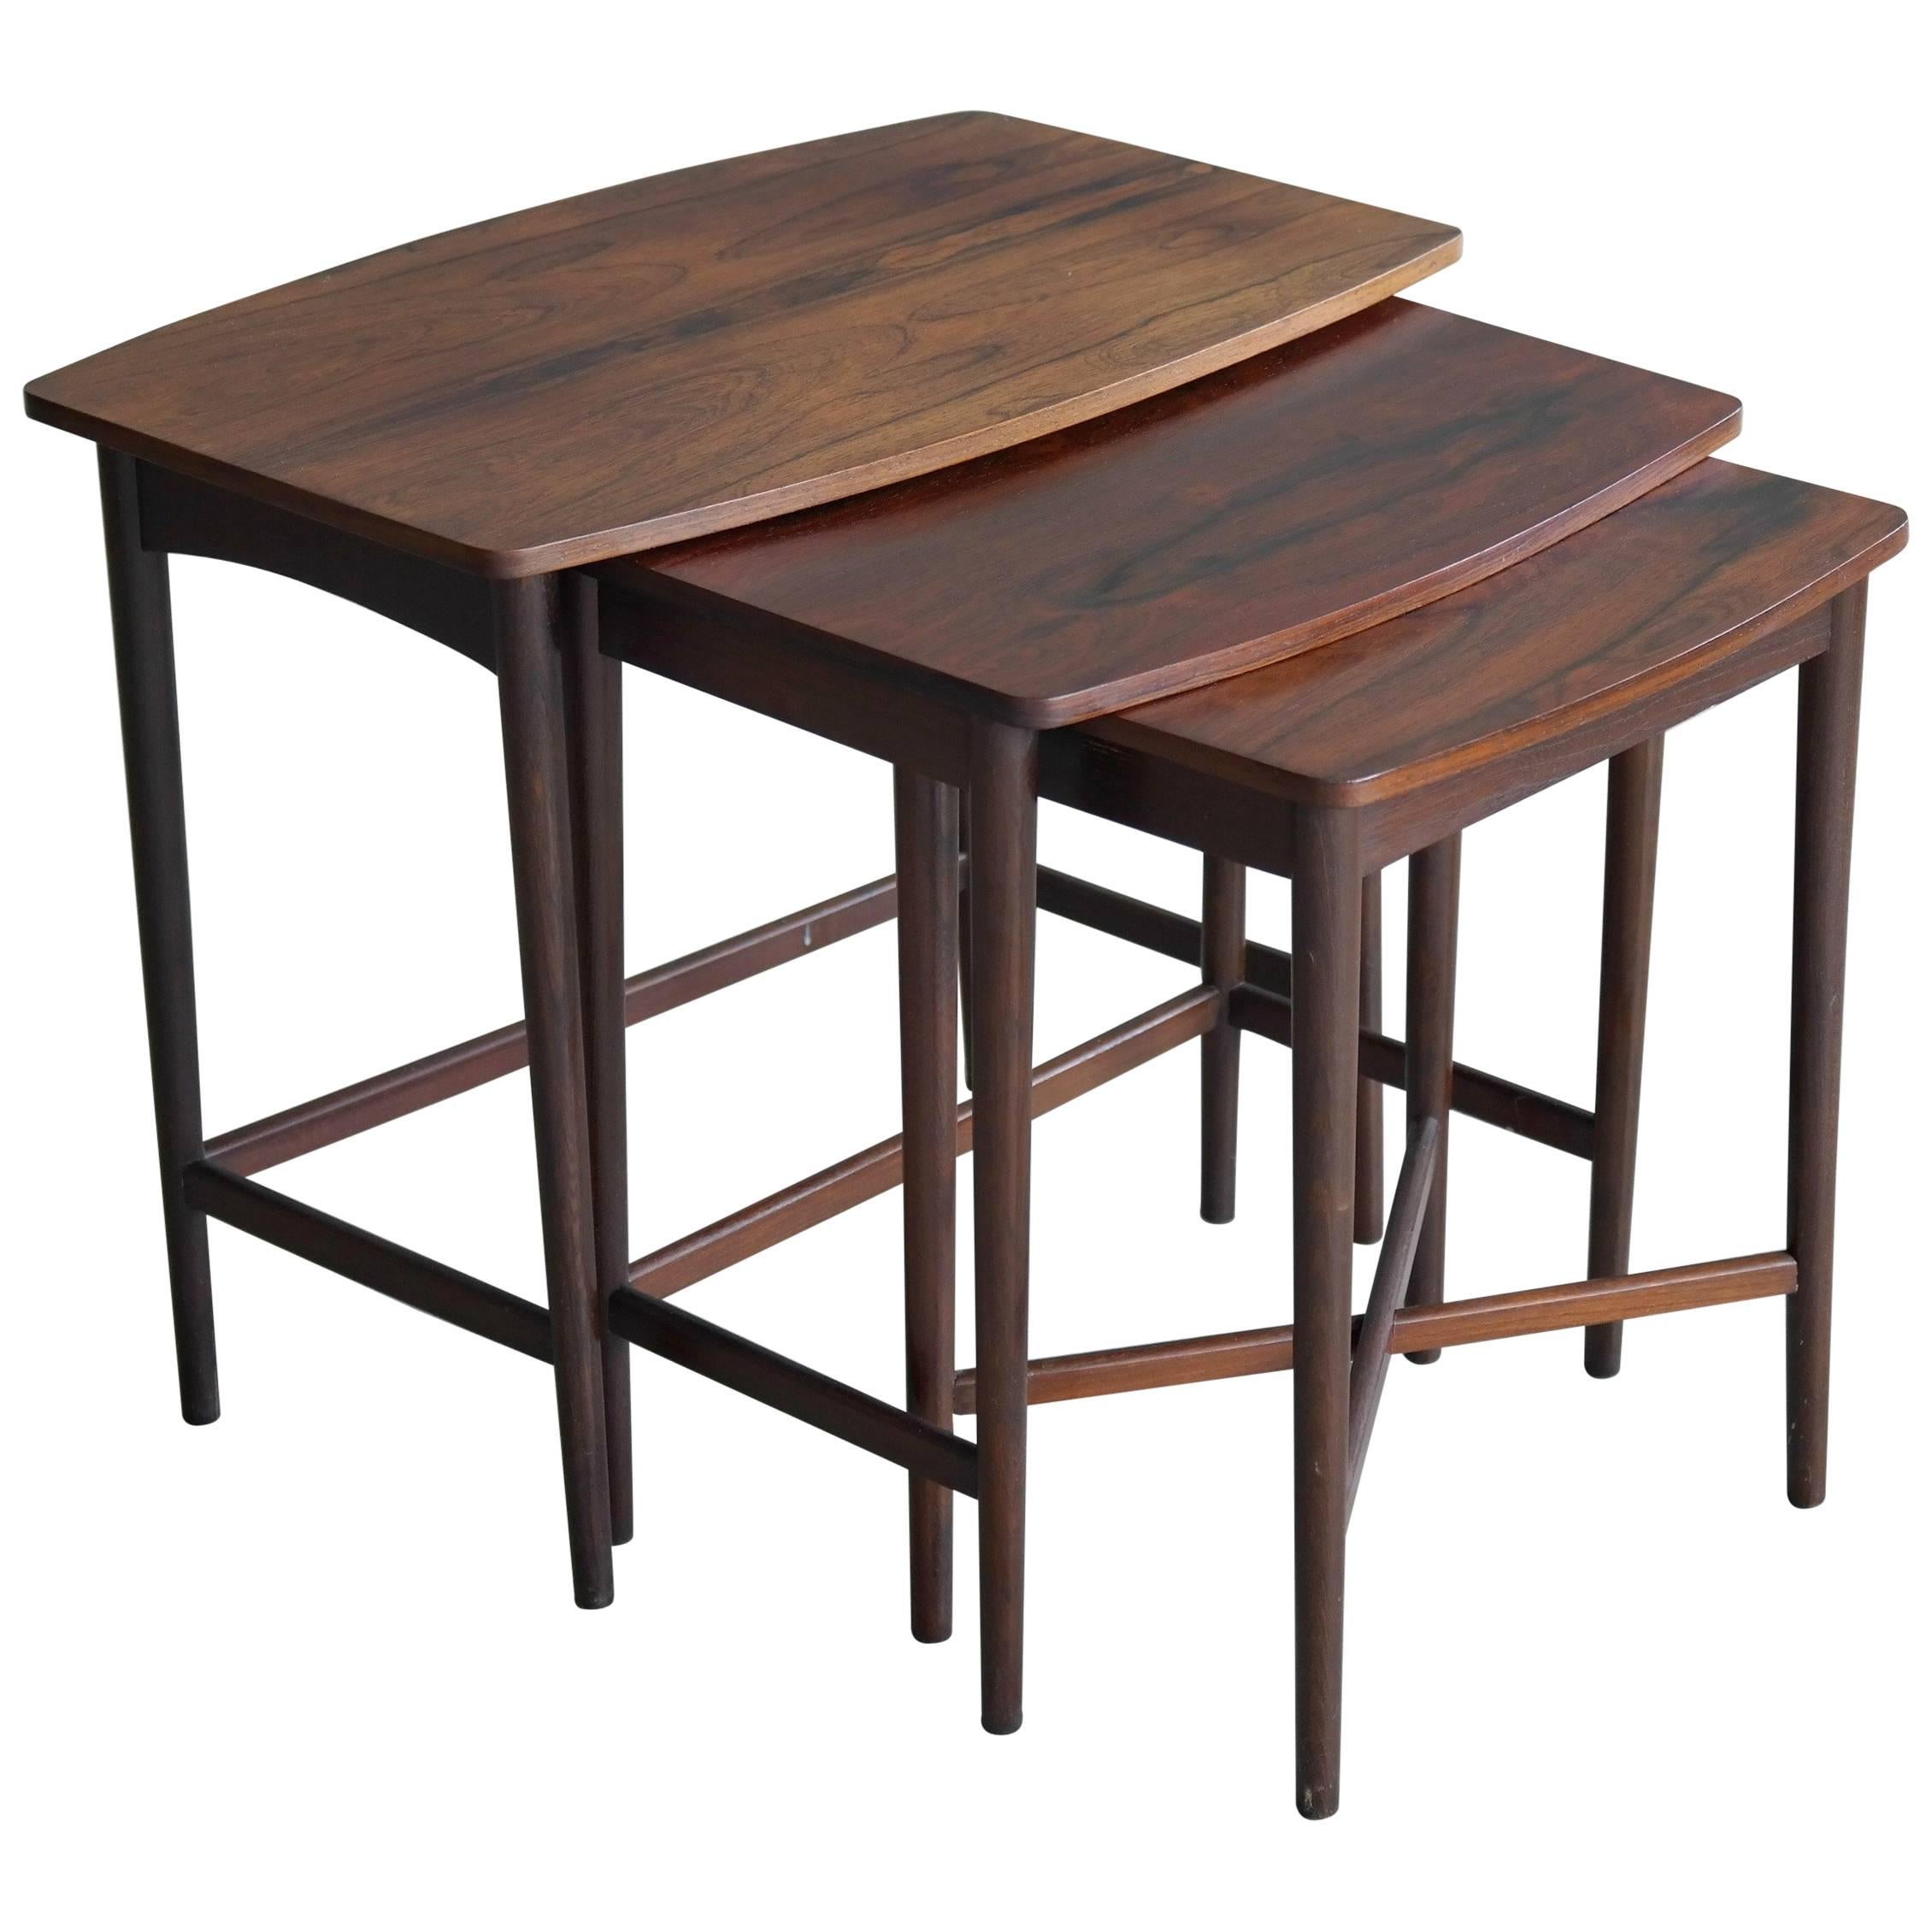 Johannes Andersen Style Nesting or Stacking Tables in Rosewood